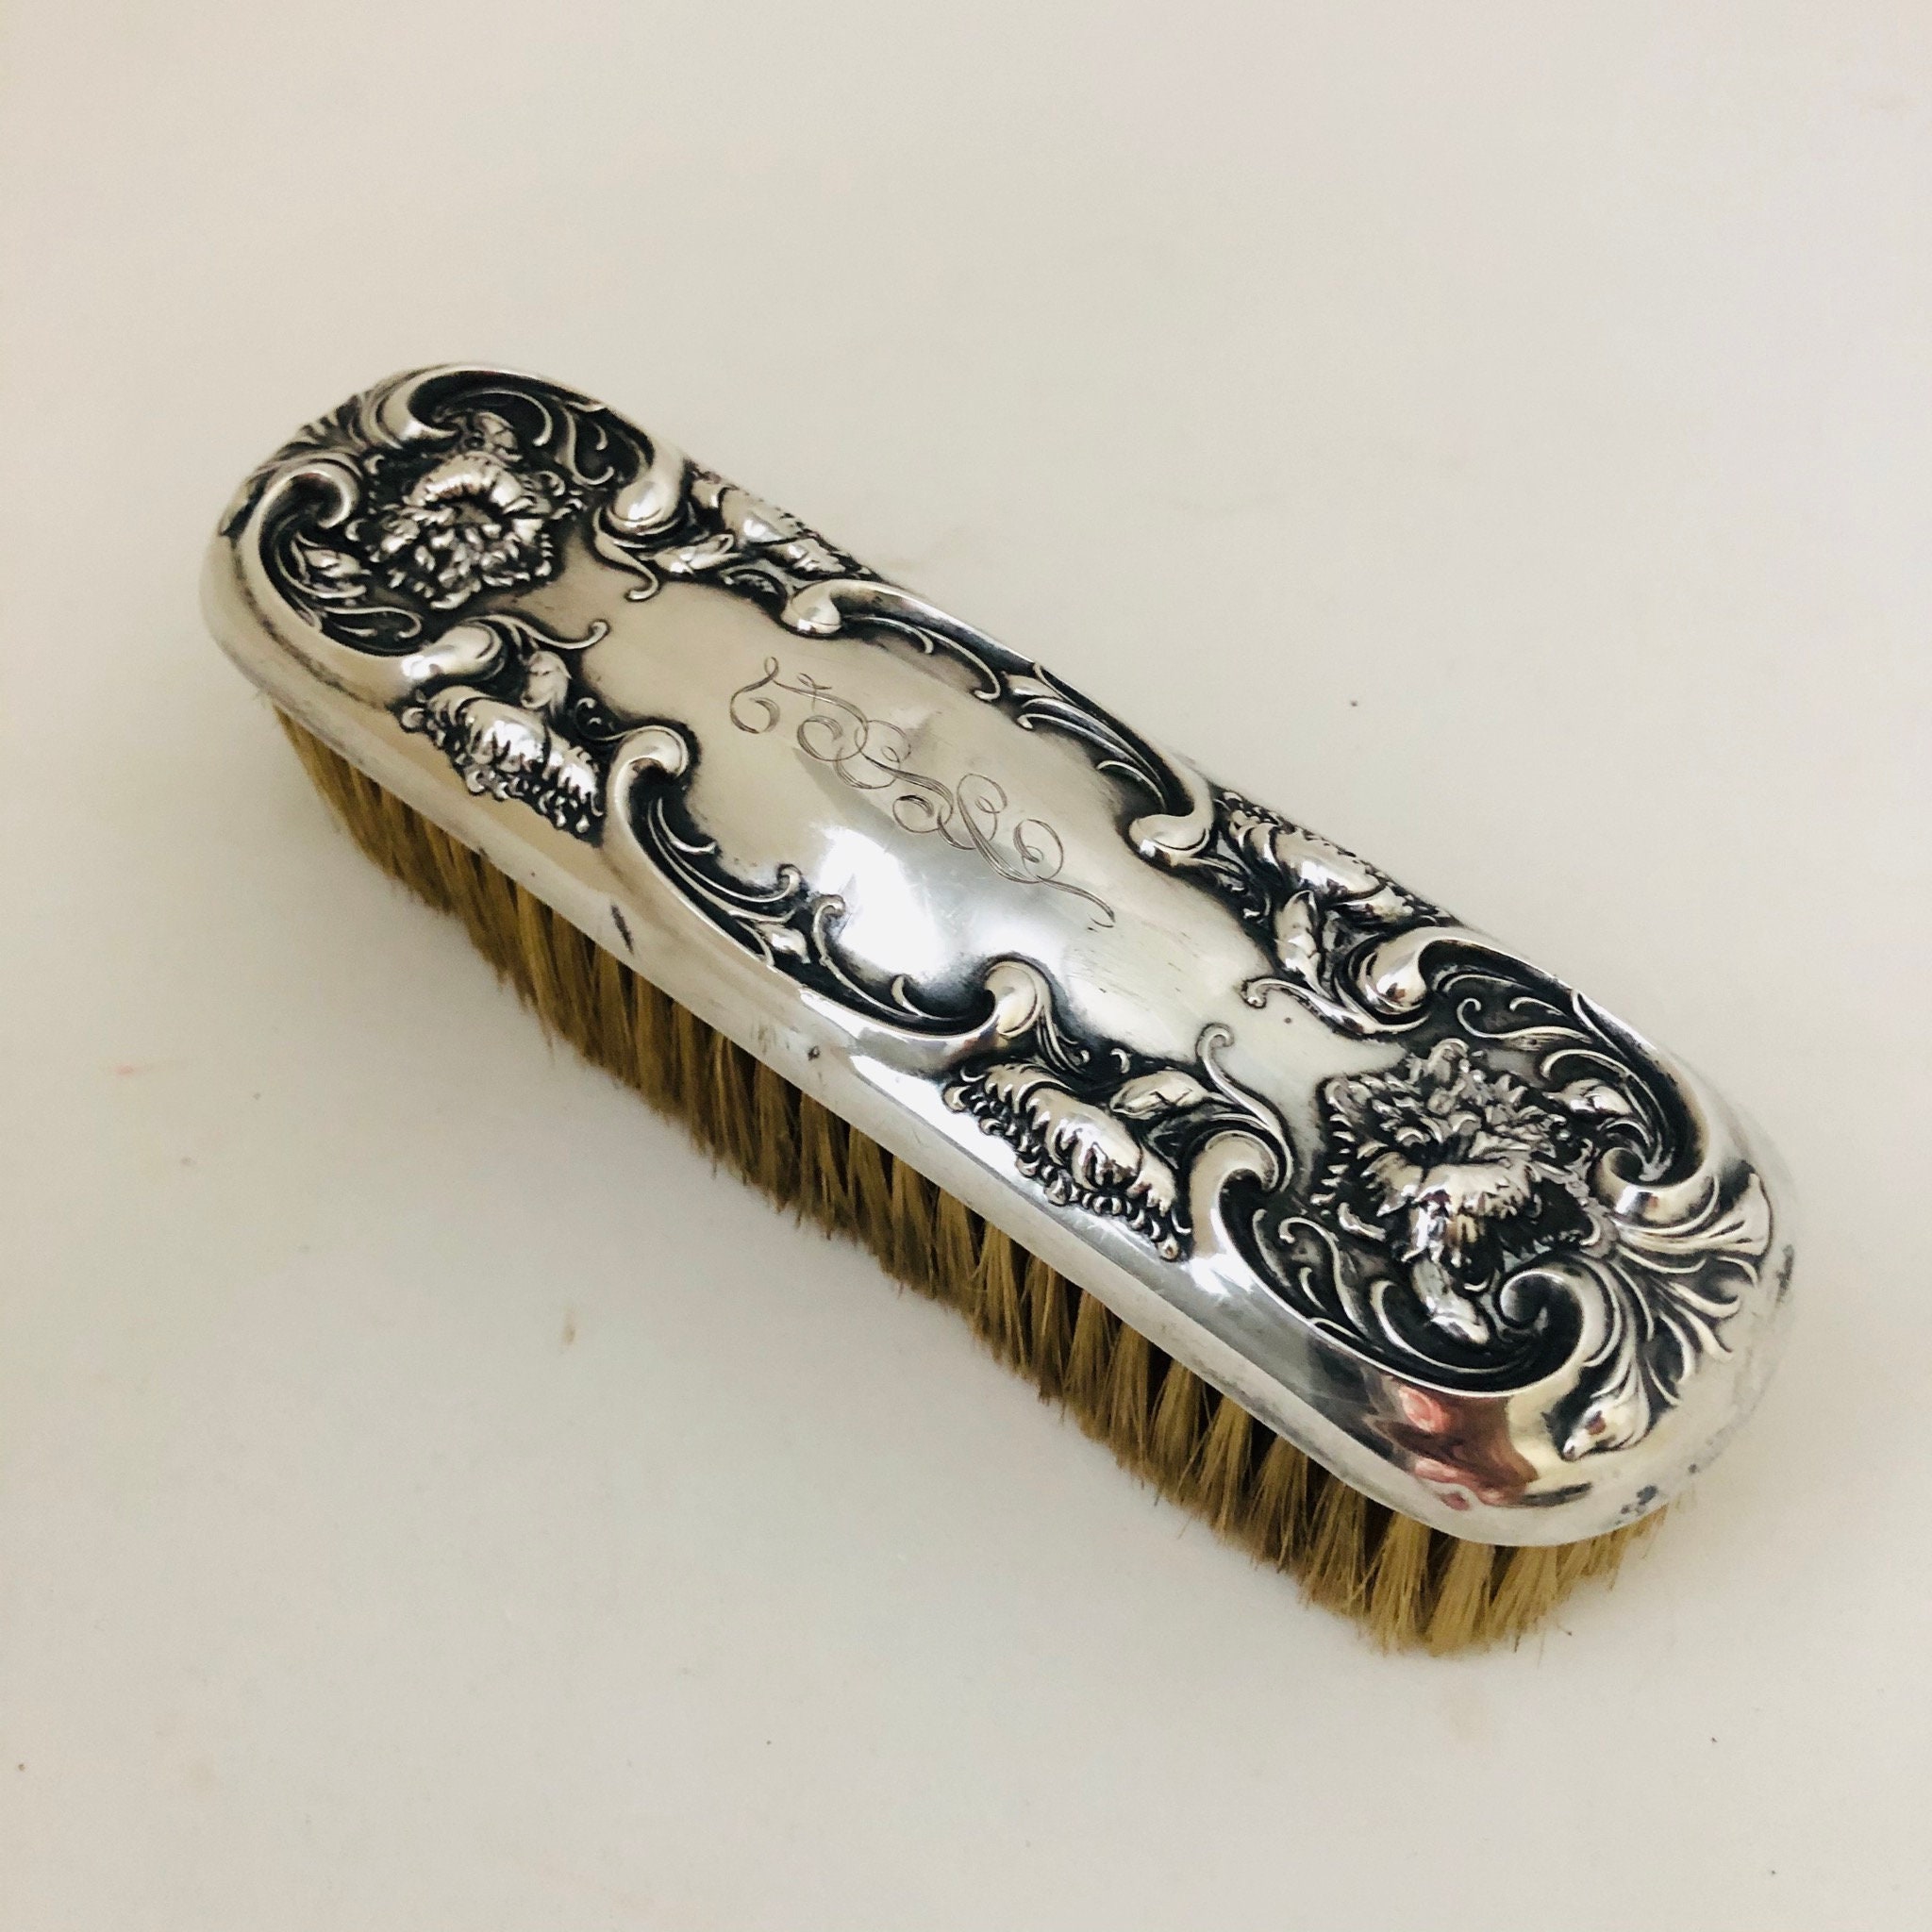 DEC 17 1895 Clothes Brush Sterling Silver 925 Fine Victorian Horse Hair